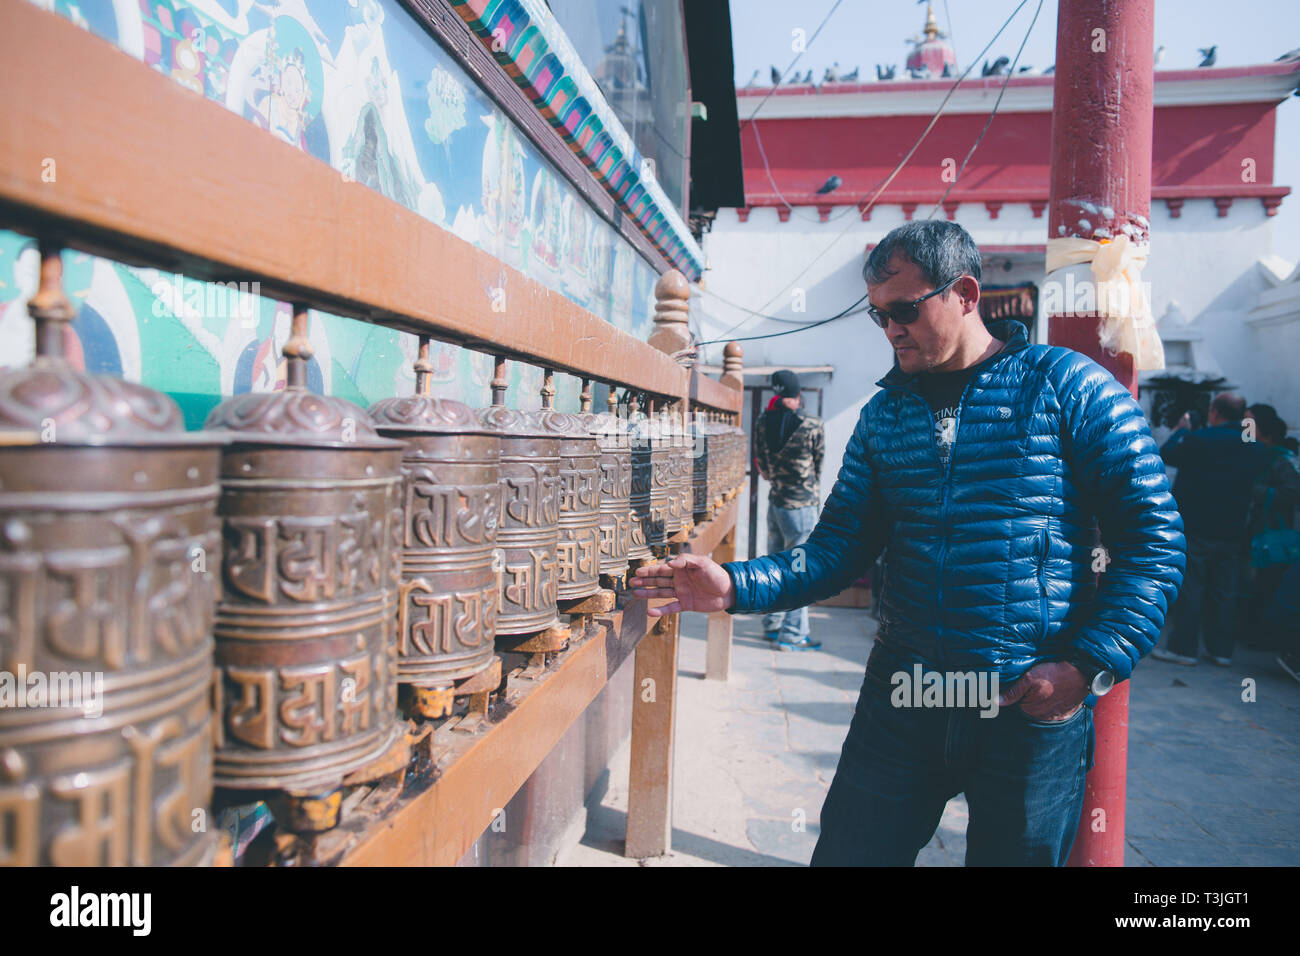 Kathmandu, Nepal. 30th Jan, 2019. Lhakpa Gelu Sherpa, 52-year-old mountain  guide from Nepal, turns prayer wheels at the Buddhist monastery. 16 years  ago he climbed Mount Everest in ten hours and 56